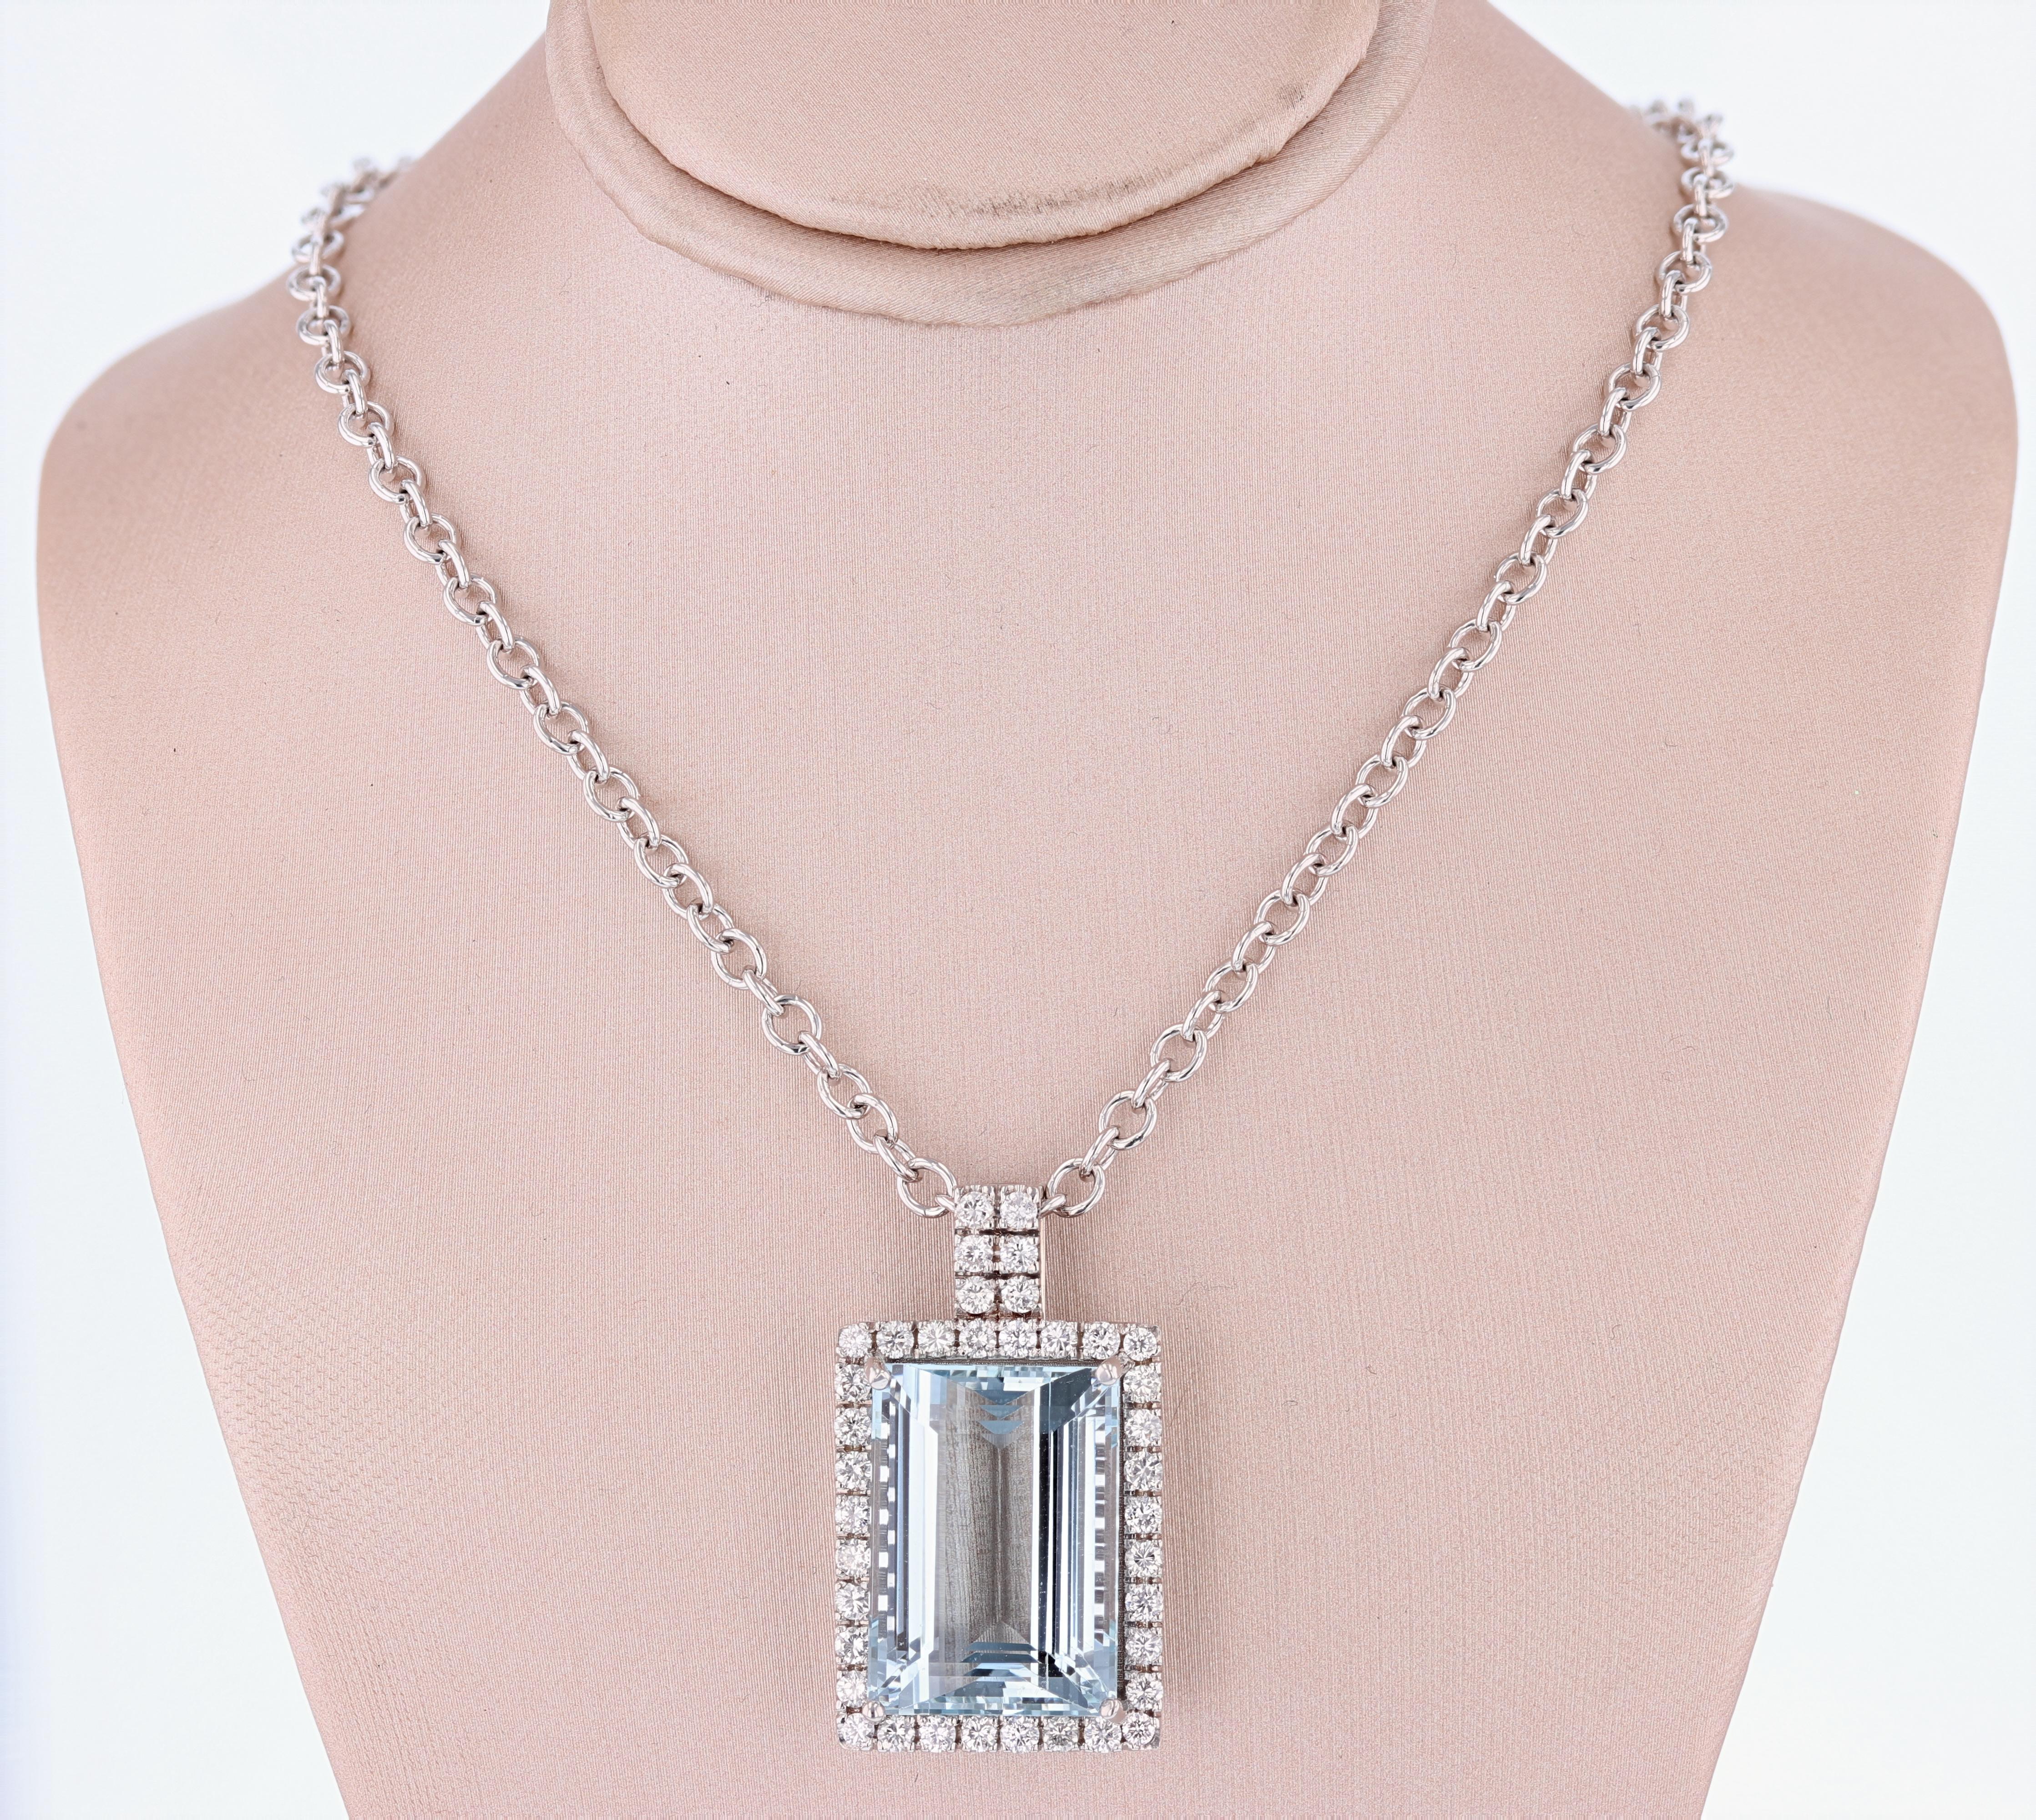 The pendant is made in 14 karat white gold and features a 31.51 carat GIA certified (certification number: 2165366599) set surrounded by round cut diamonds weighing 1.75c total weight color grade (G) clarity grade (VS1/VS2) prong set. 

The chain is